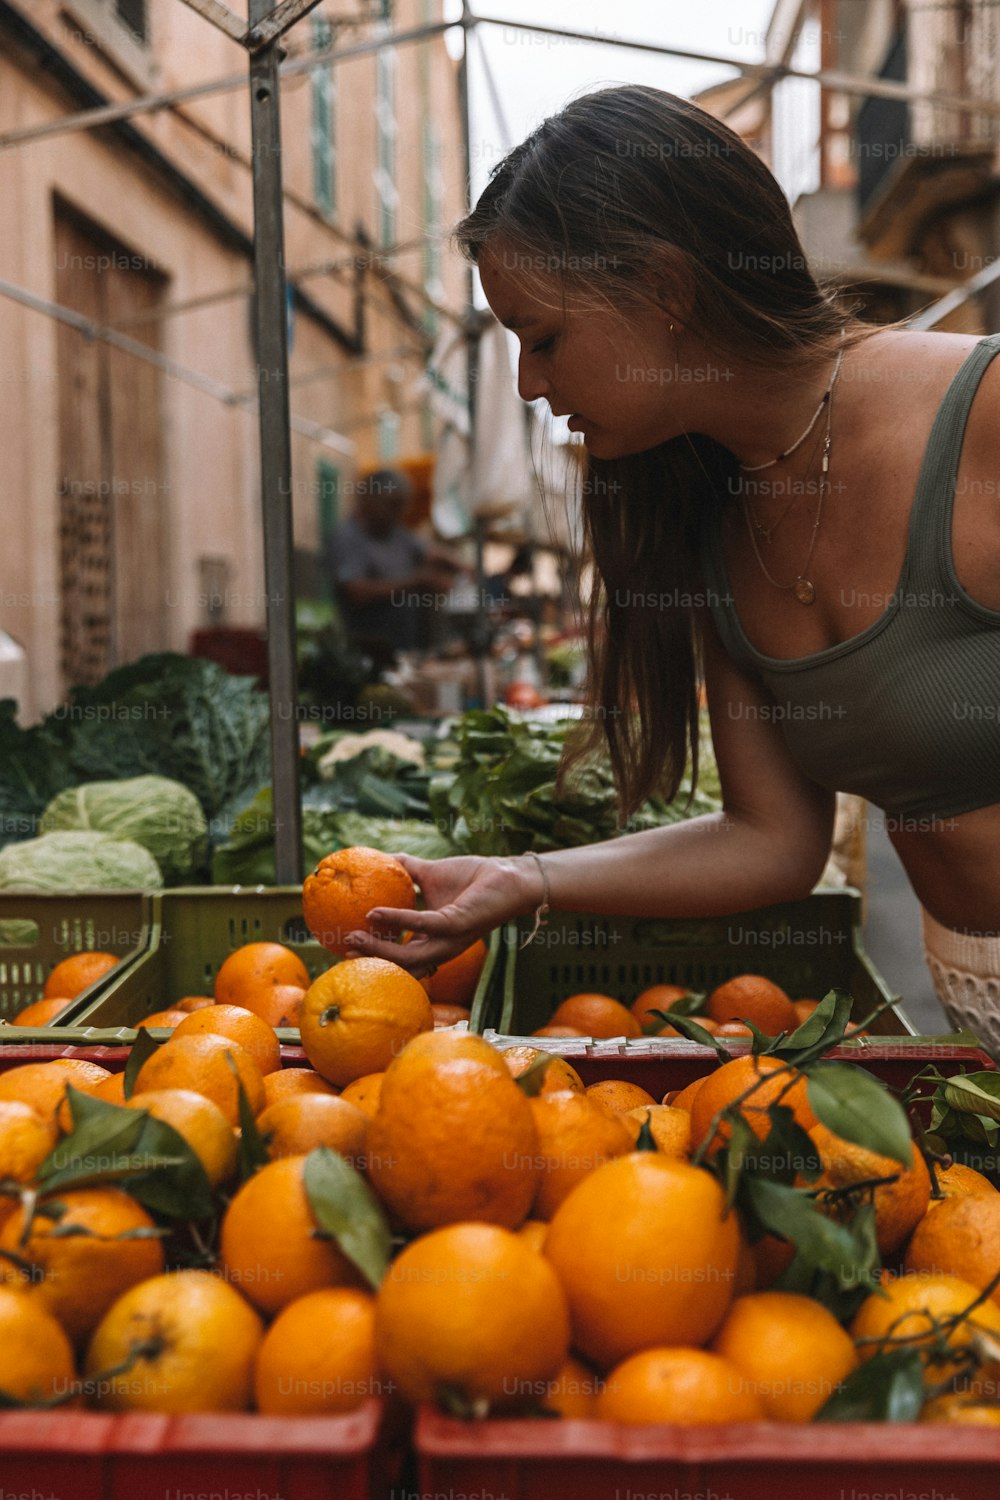 a woman in a green tank top picking up oranges